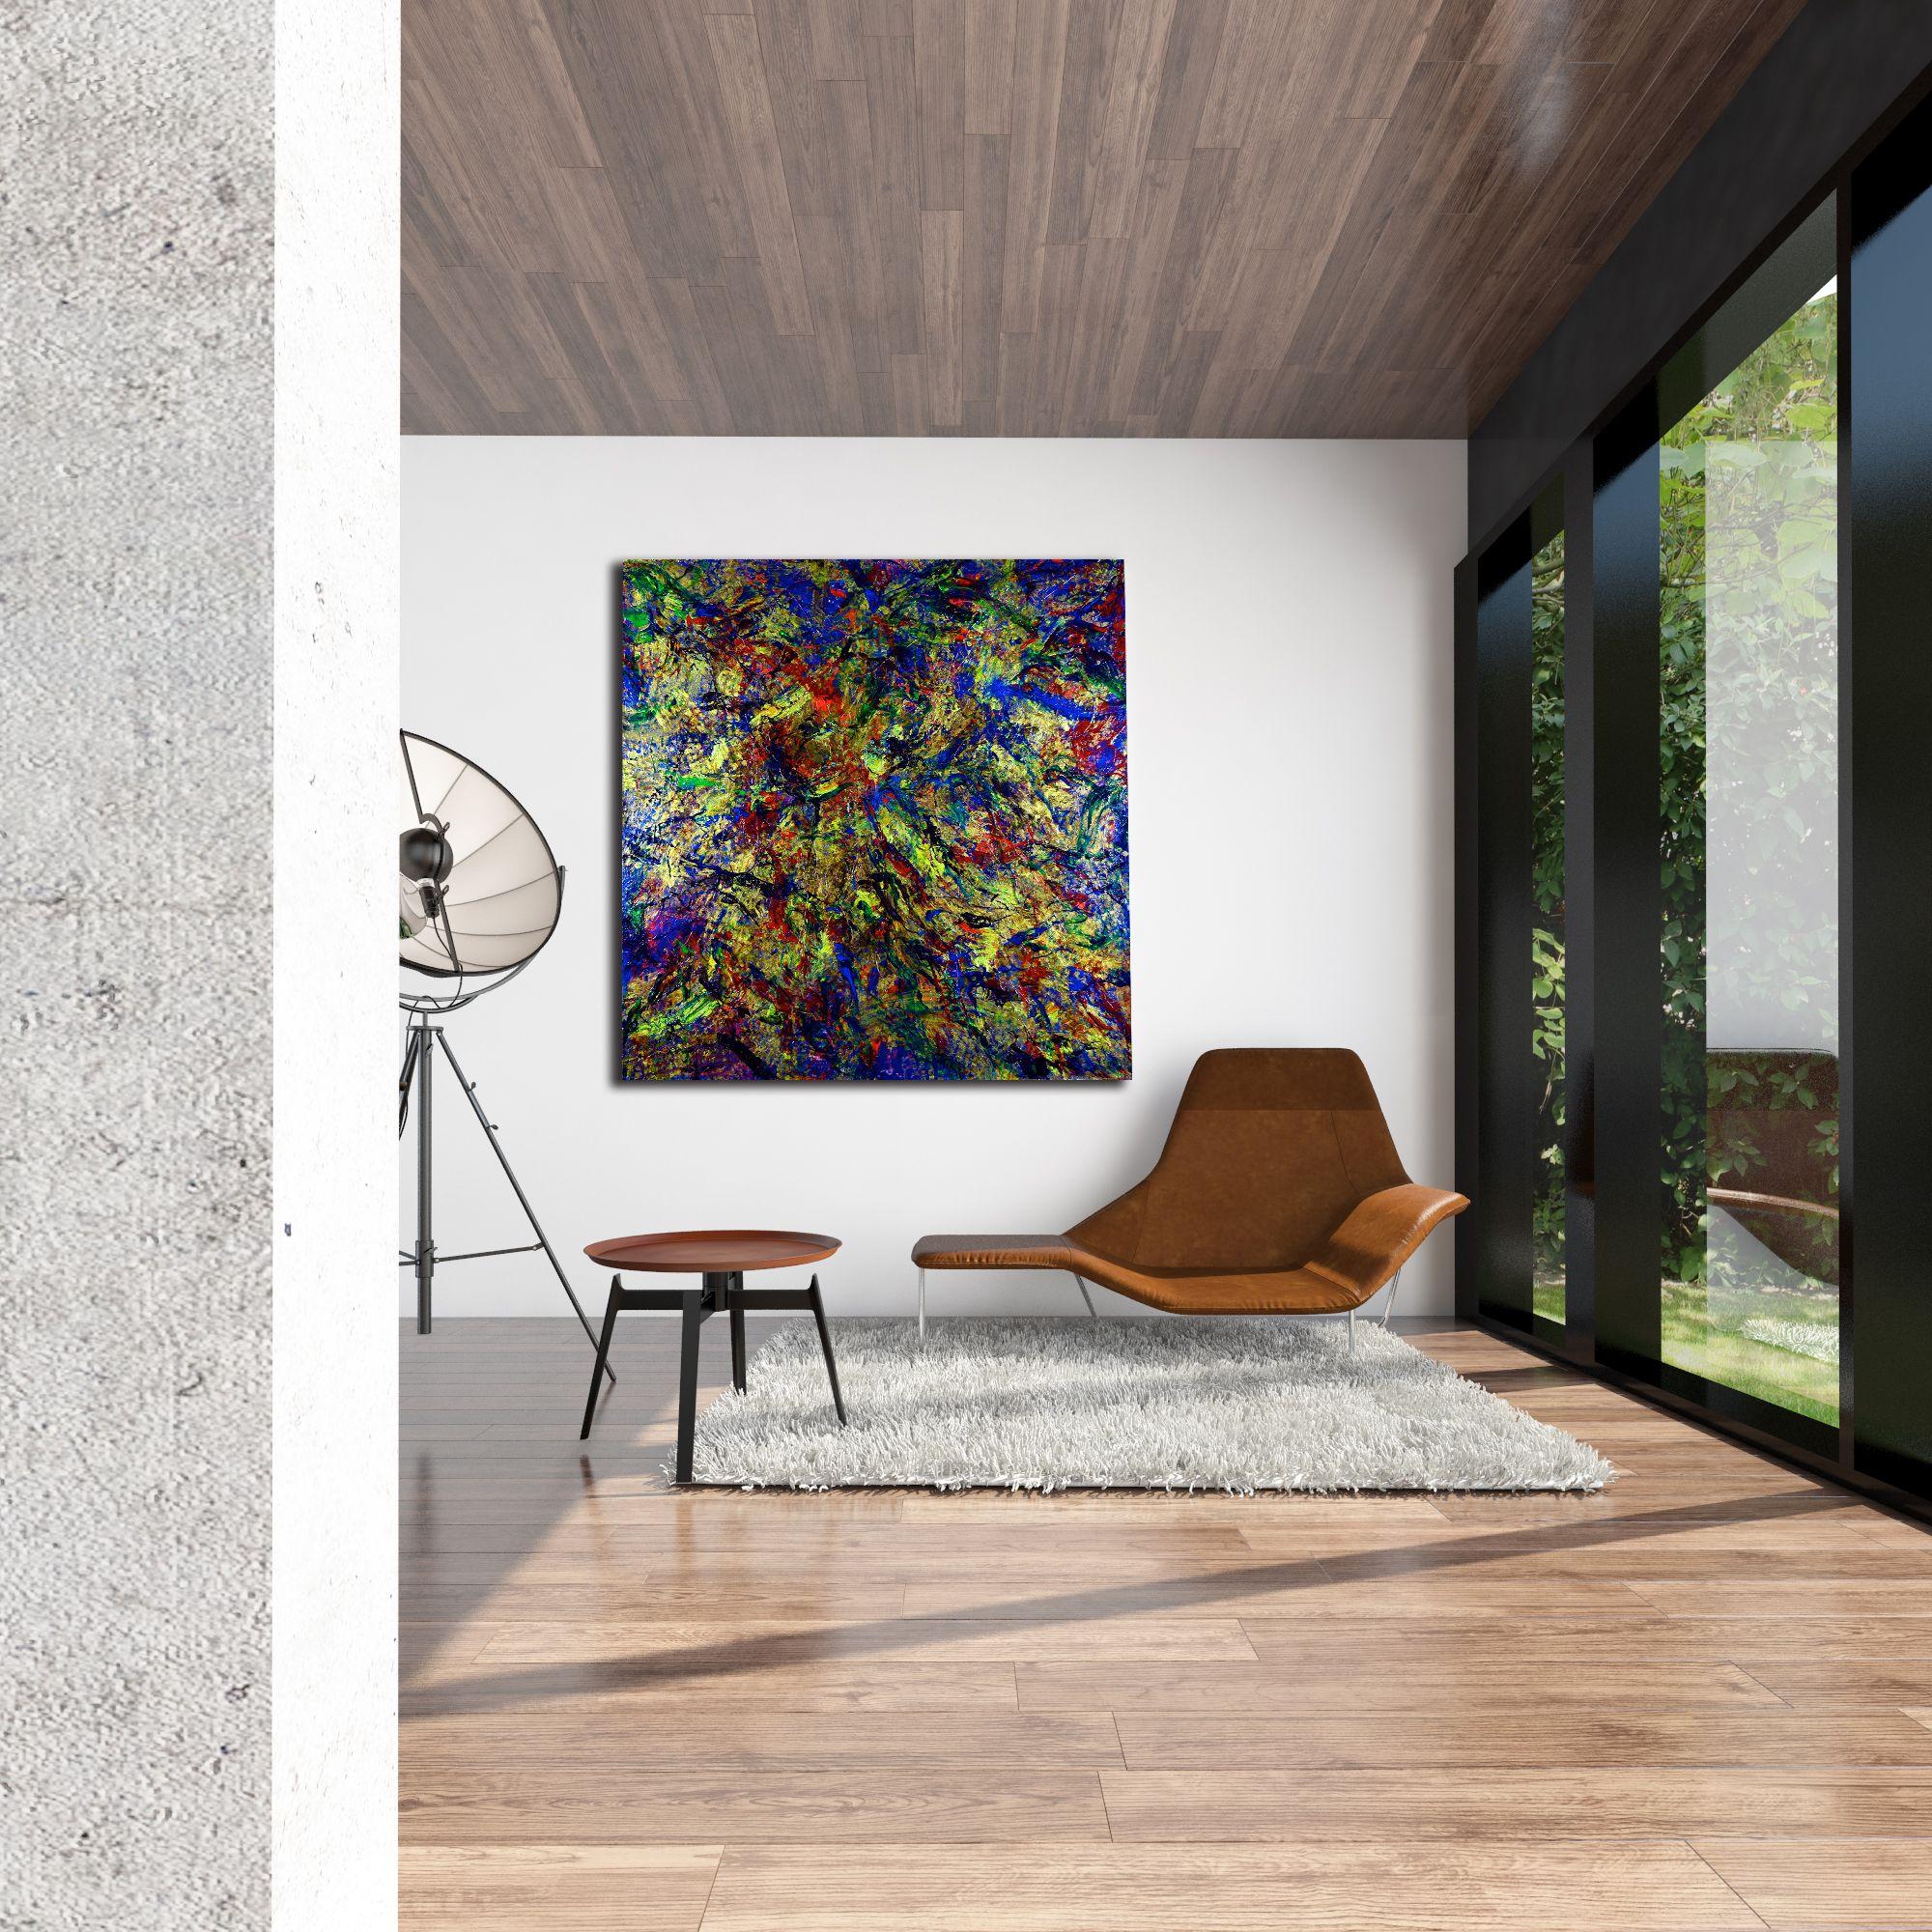 - Ready To Hang    - Signed Canvas    - Signed Certificate Of Authenticity    - Bold Statement Piece    Complex One Of A Kind Original Work With Incredible Depth. This Work Was Inspired By The Incredible Diversity And Endless Complexity Of The Rain